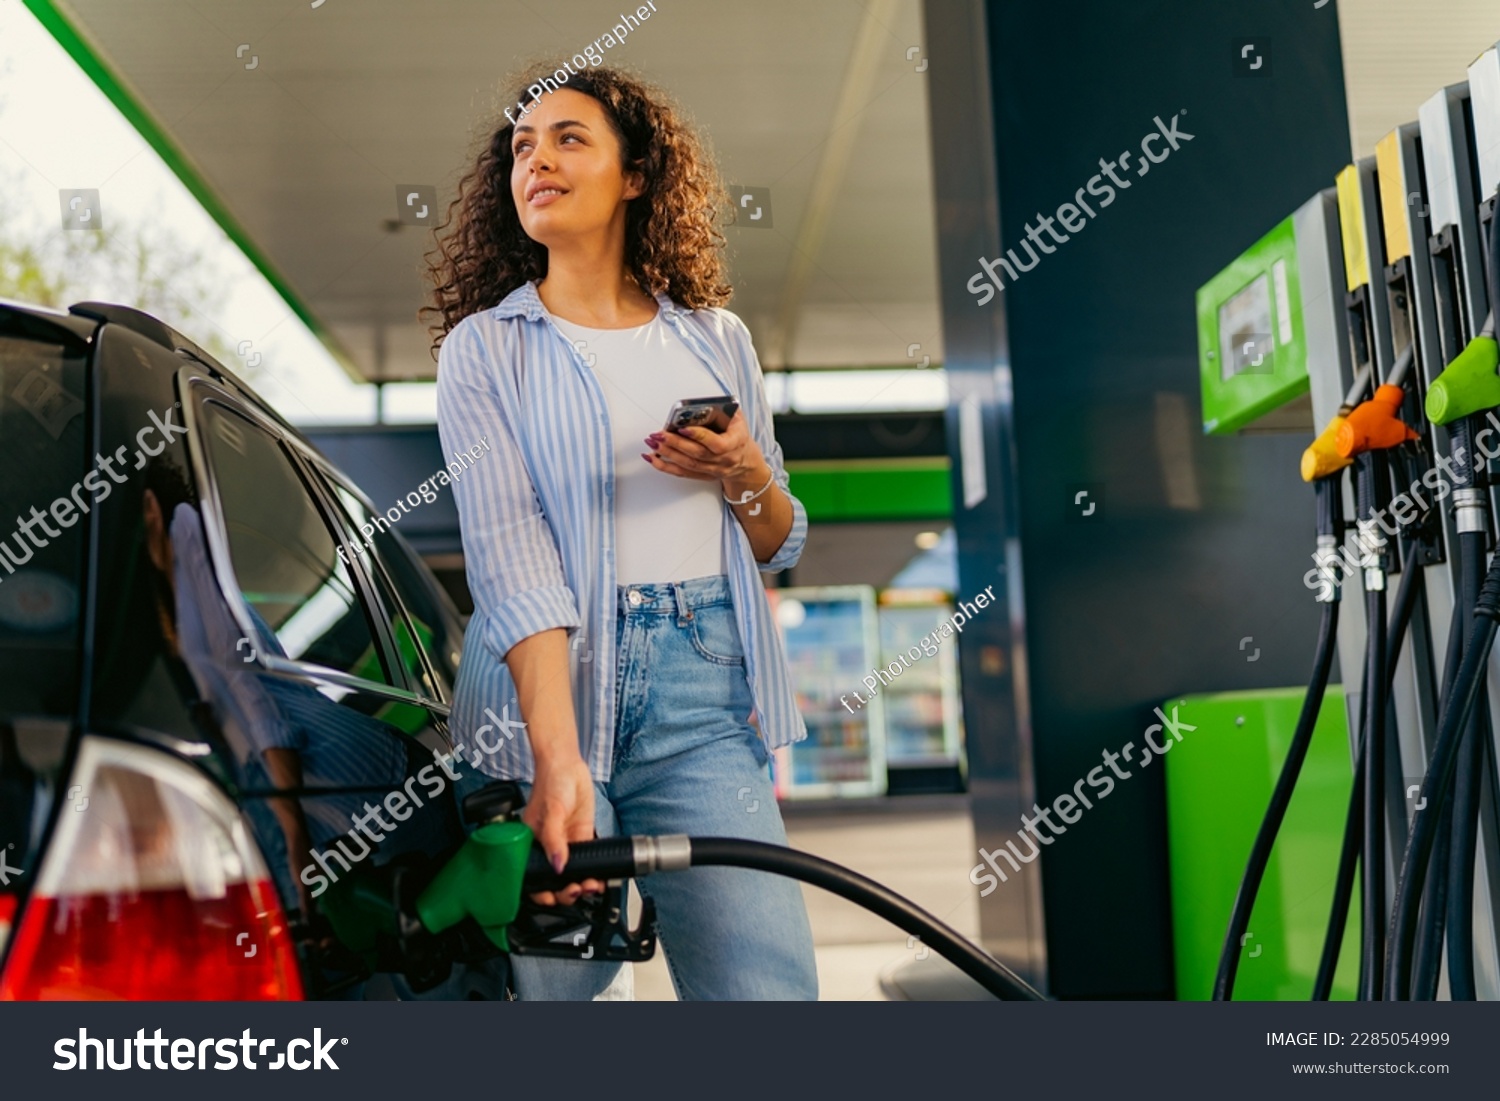 A young beautiful woman does not follow the safety rules and uses the phone while filling her car gas tank #2285054999